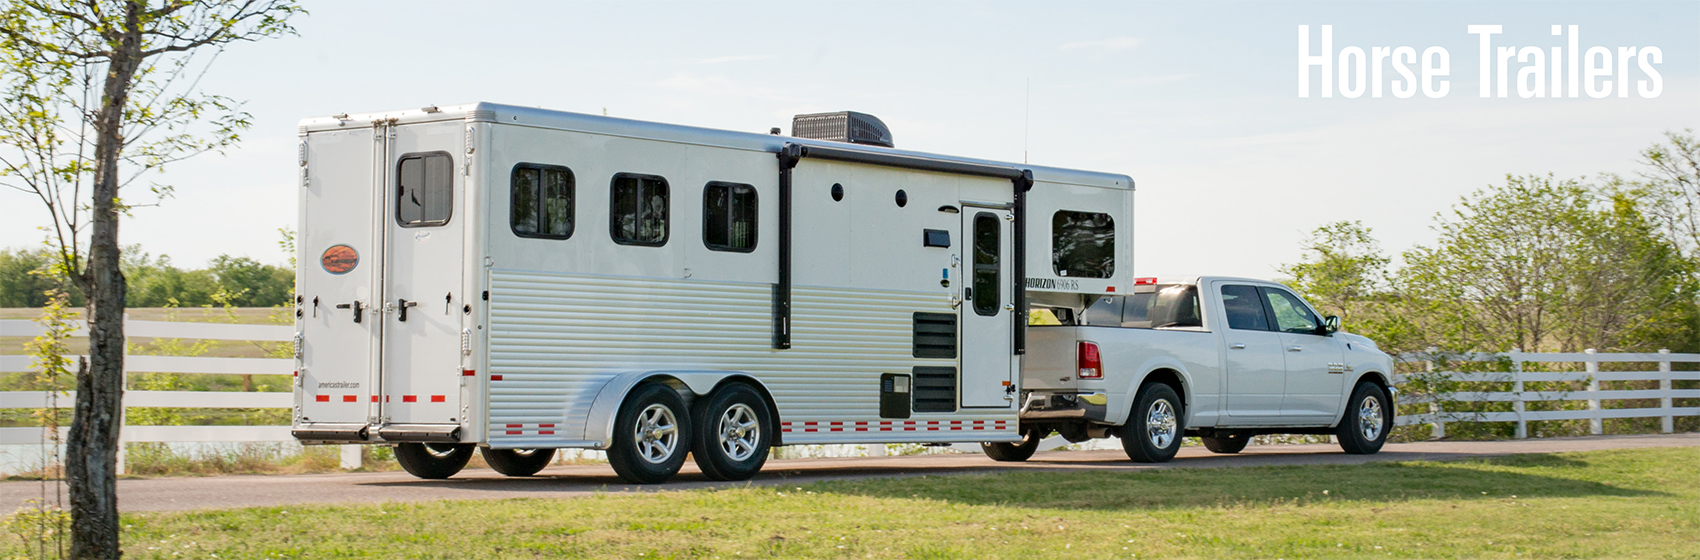 Horse Trailers Image